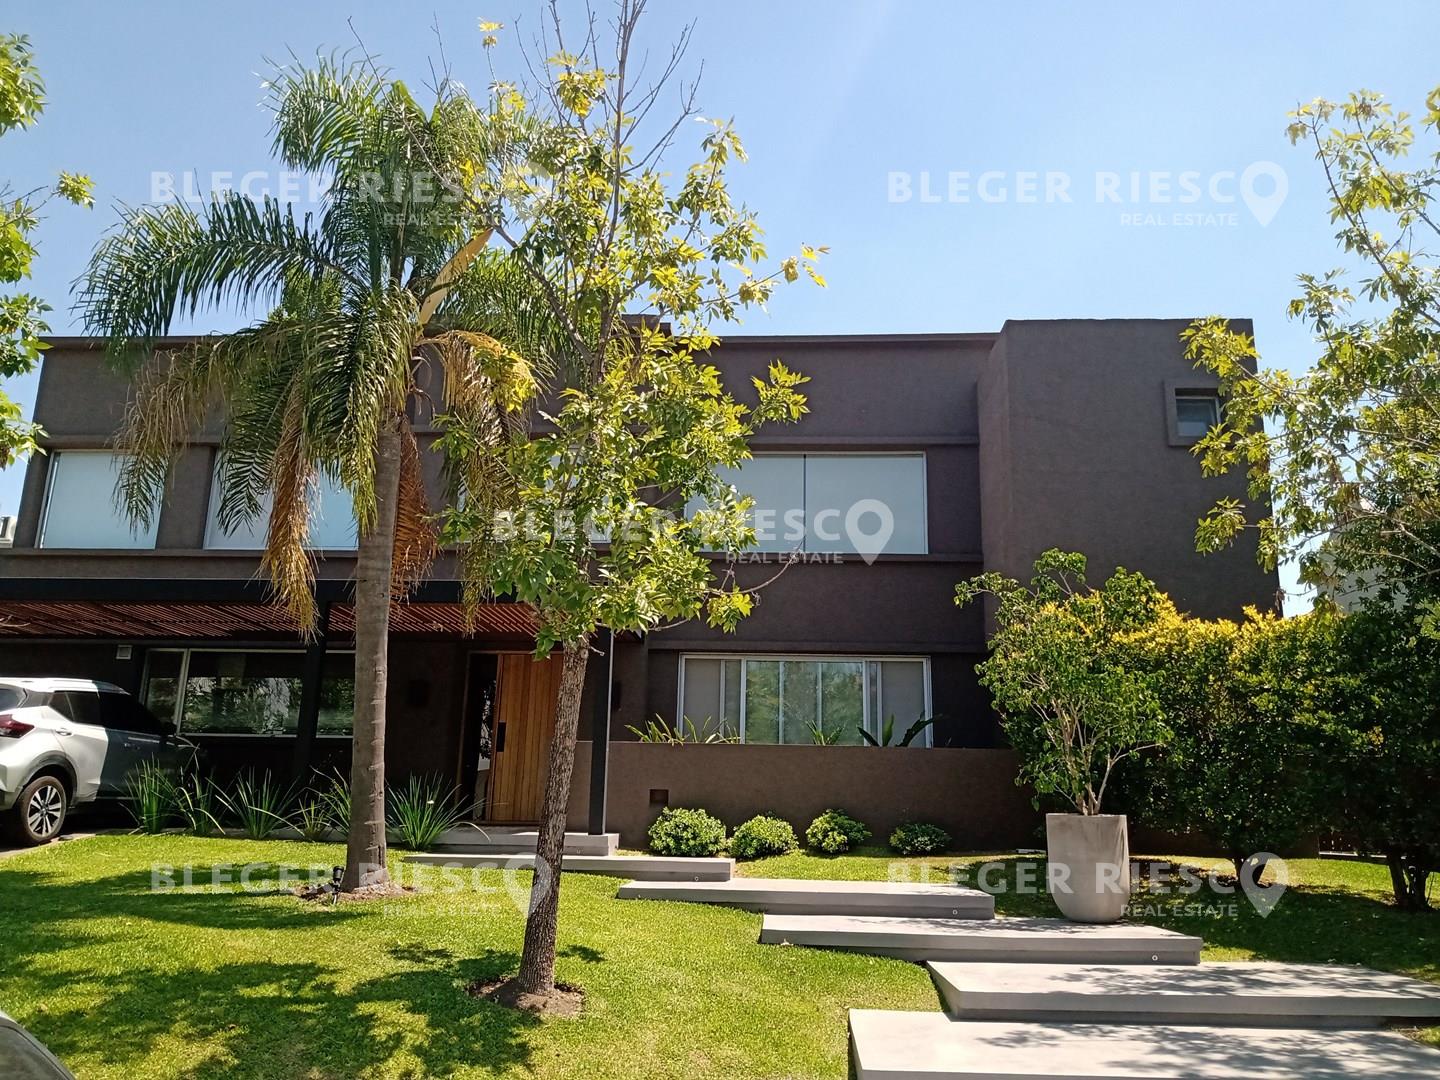 #3994838 | Alquiler | Casa | Los Castores (Bleger-Riesco Real State)